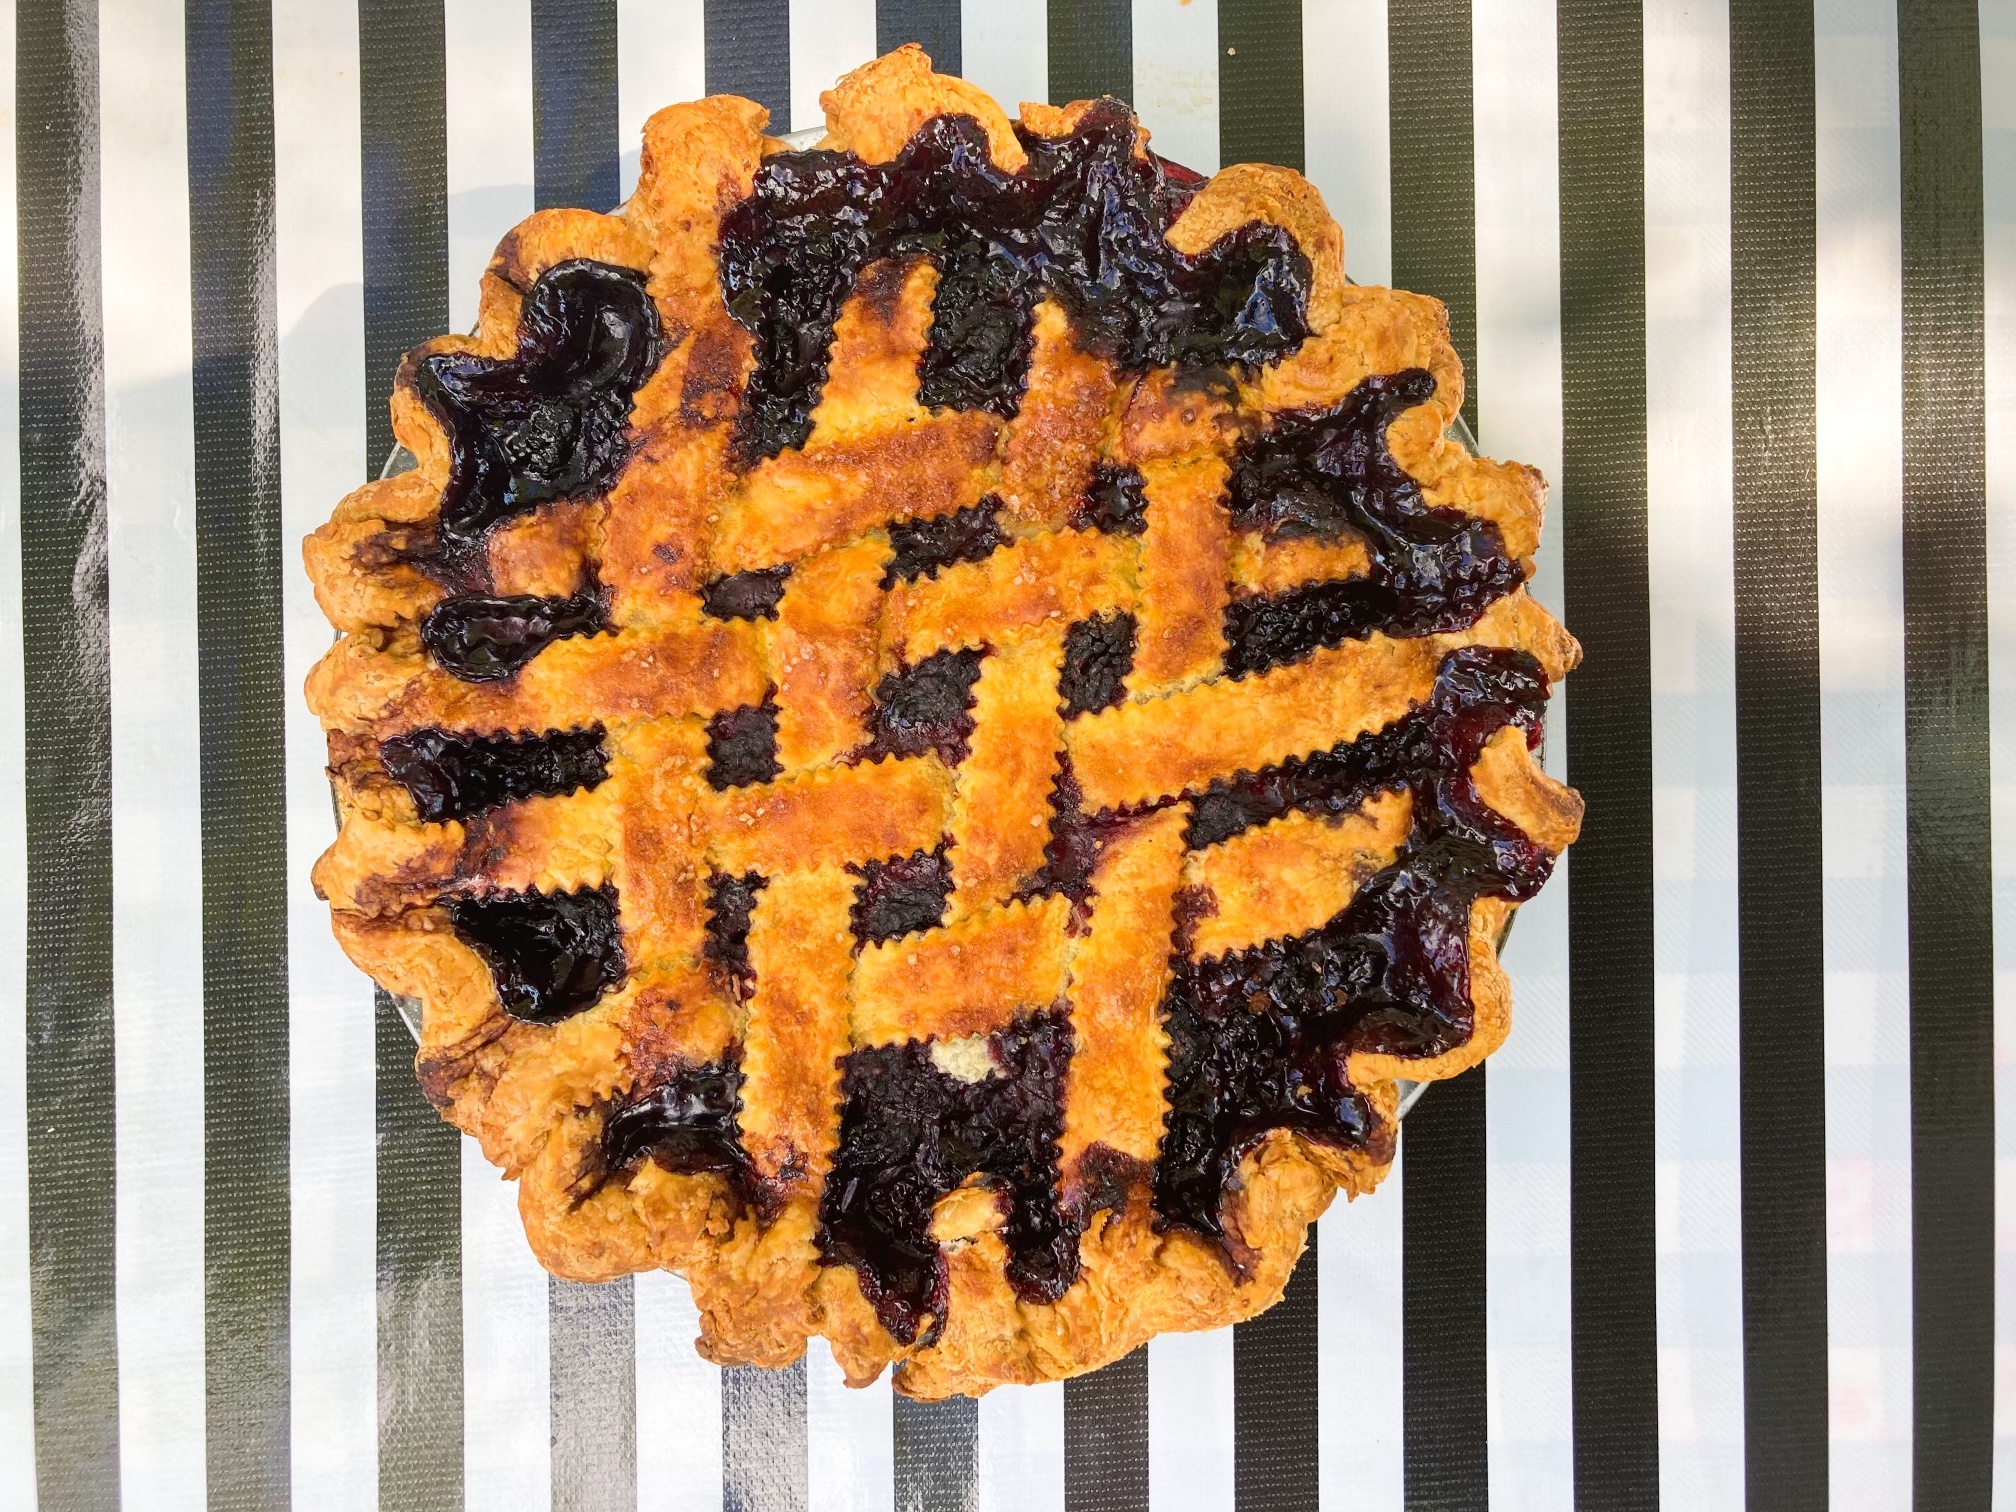 A lattice-topped marionberry pie sits on a black-and-white striped tablecloth at the outdoor tables at Lauretta Jean’s in Portland, Oregon.